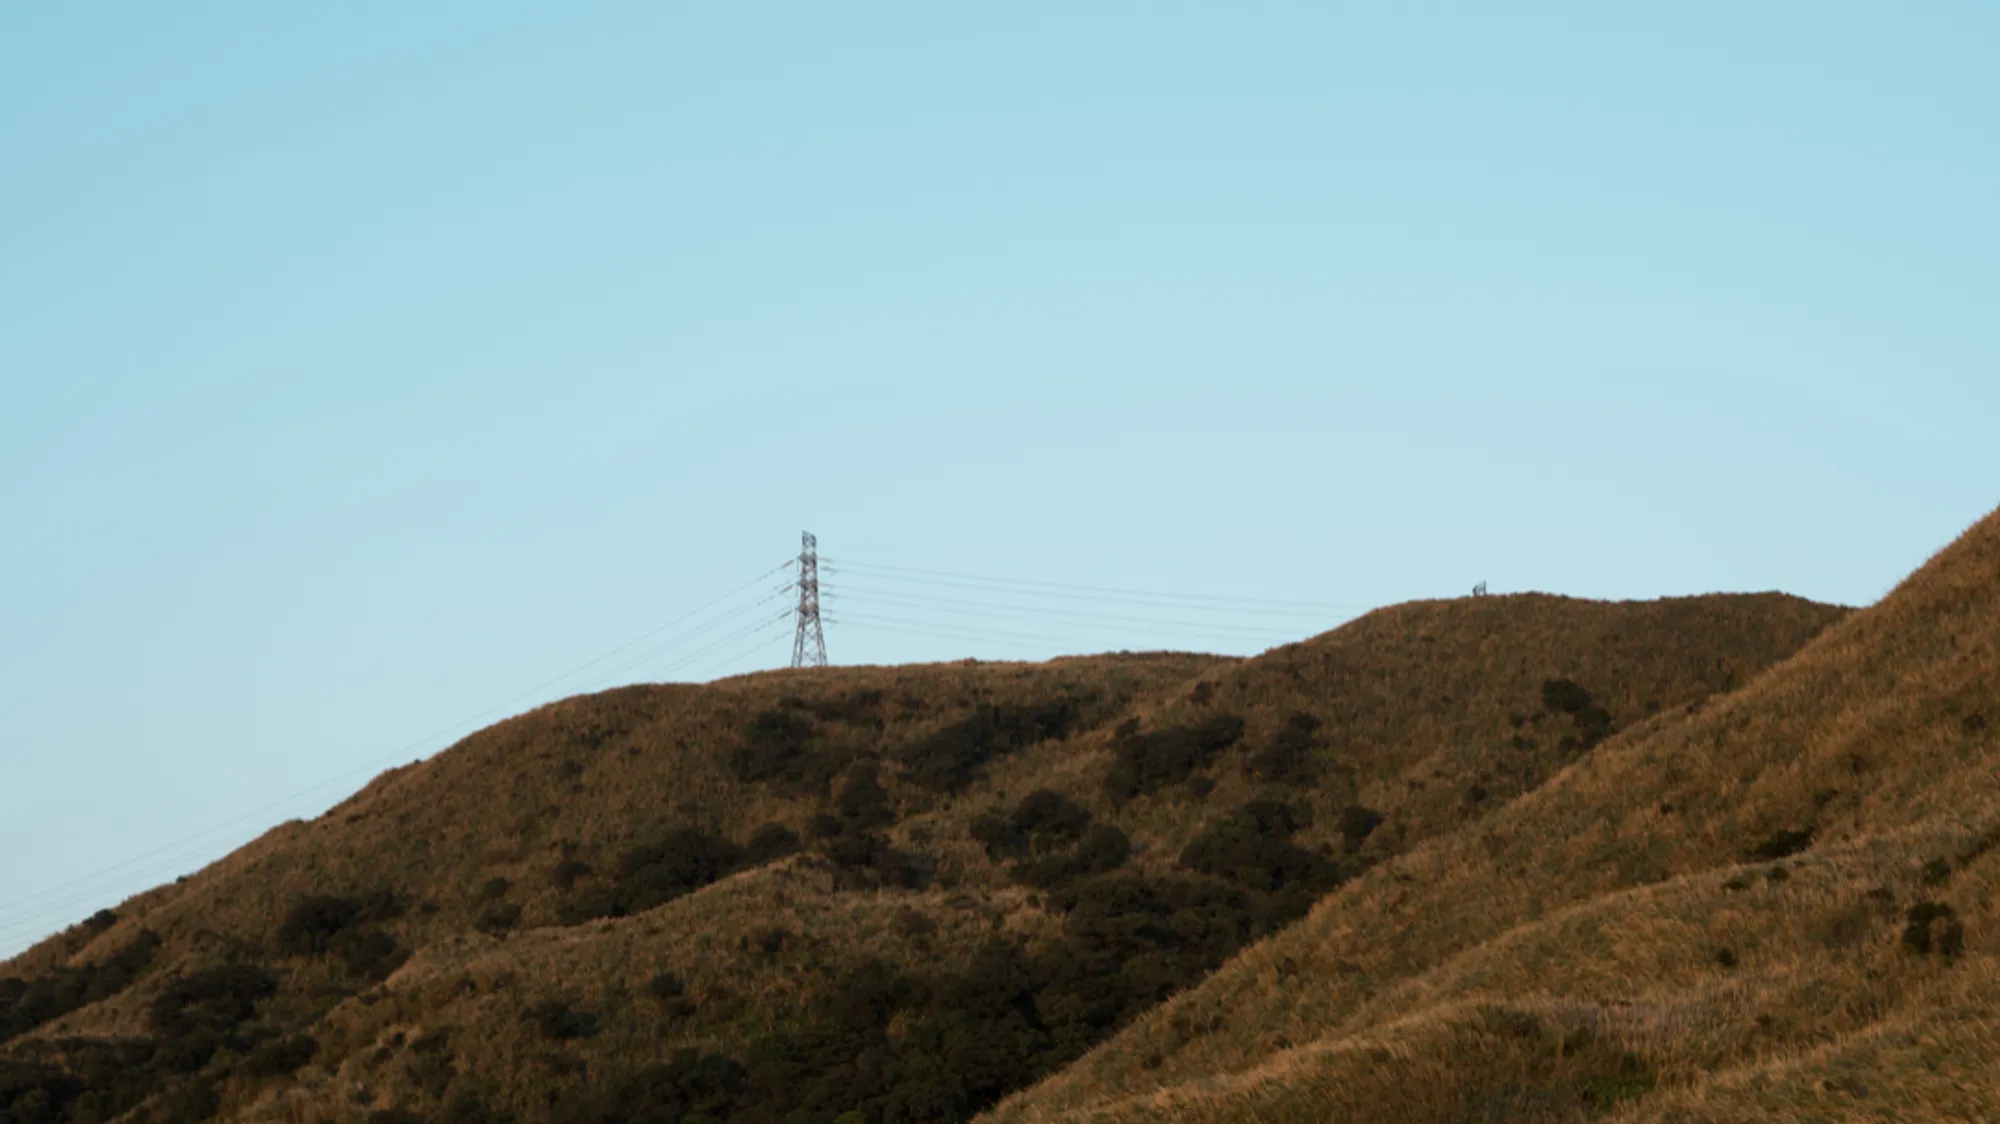 An image showing a transmission tower in a mountaineous region